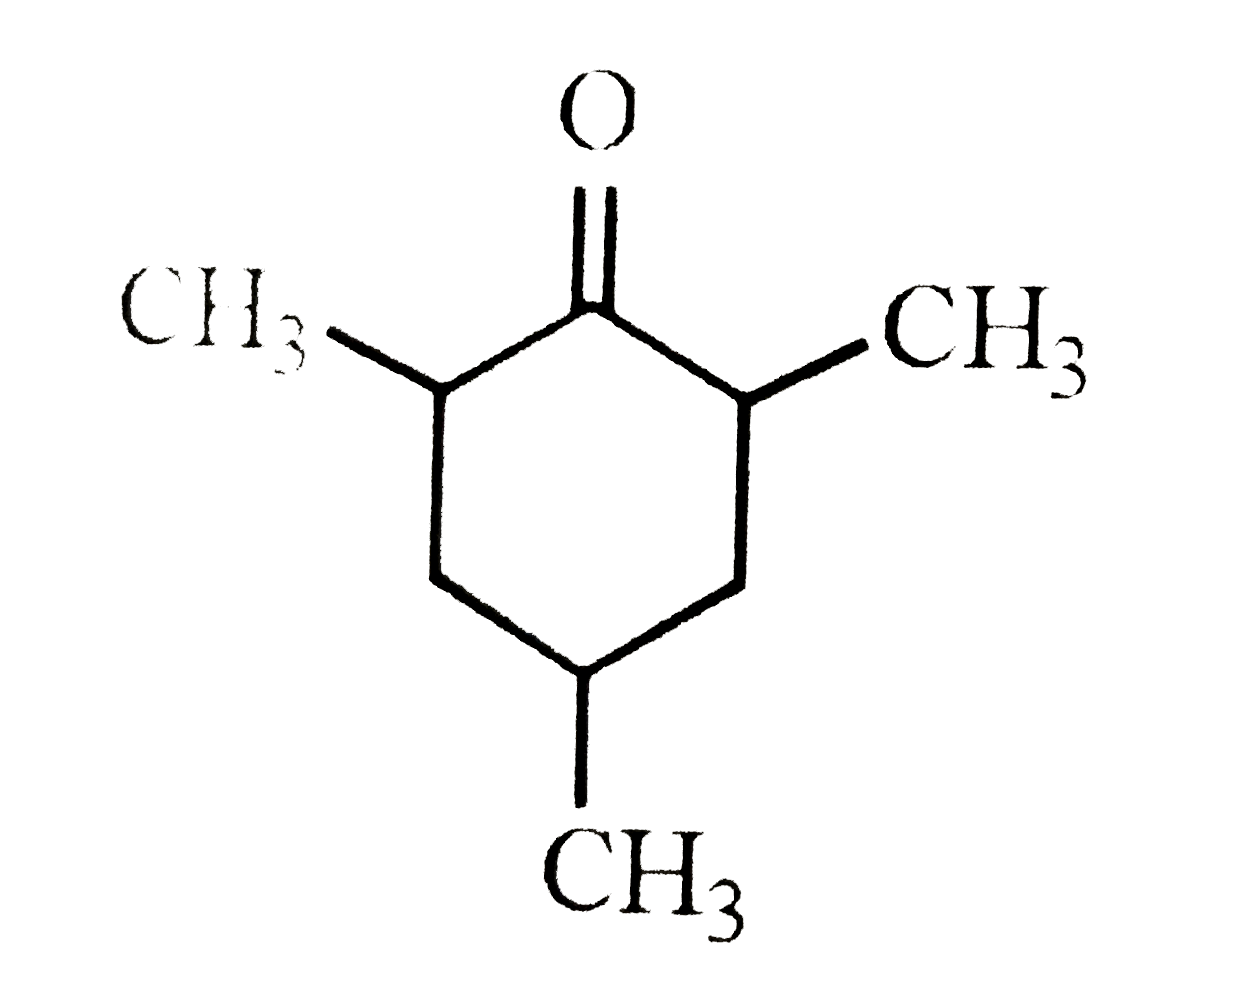 The correct IUPAC name for the compound